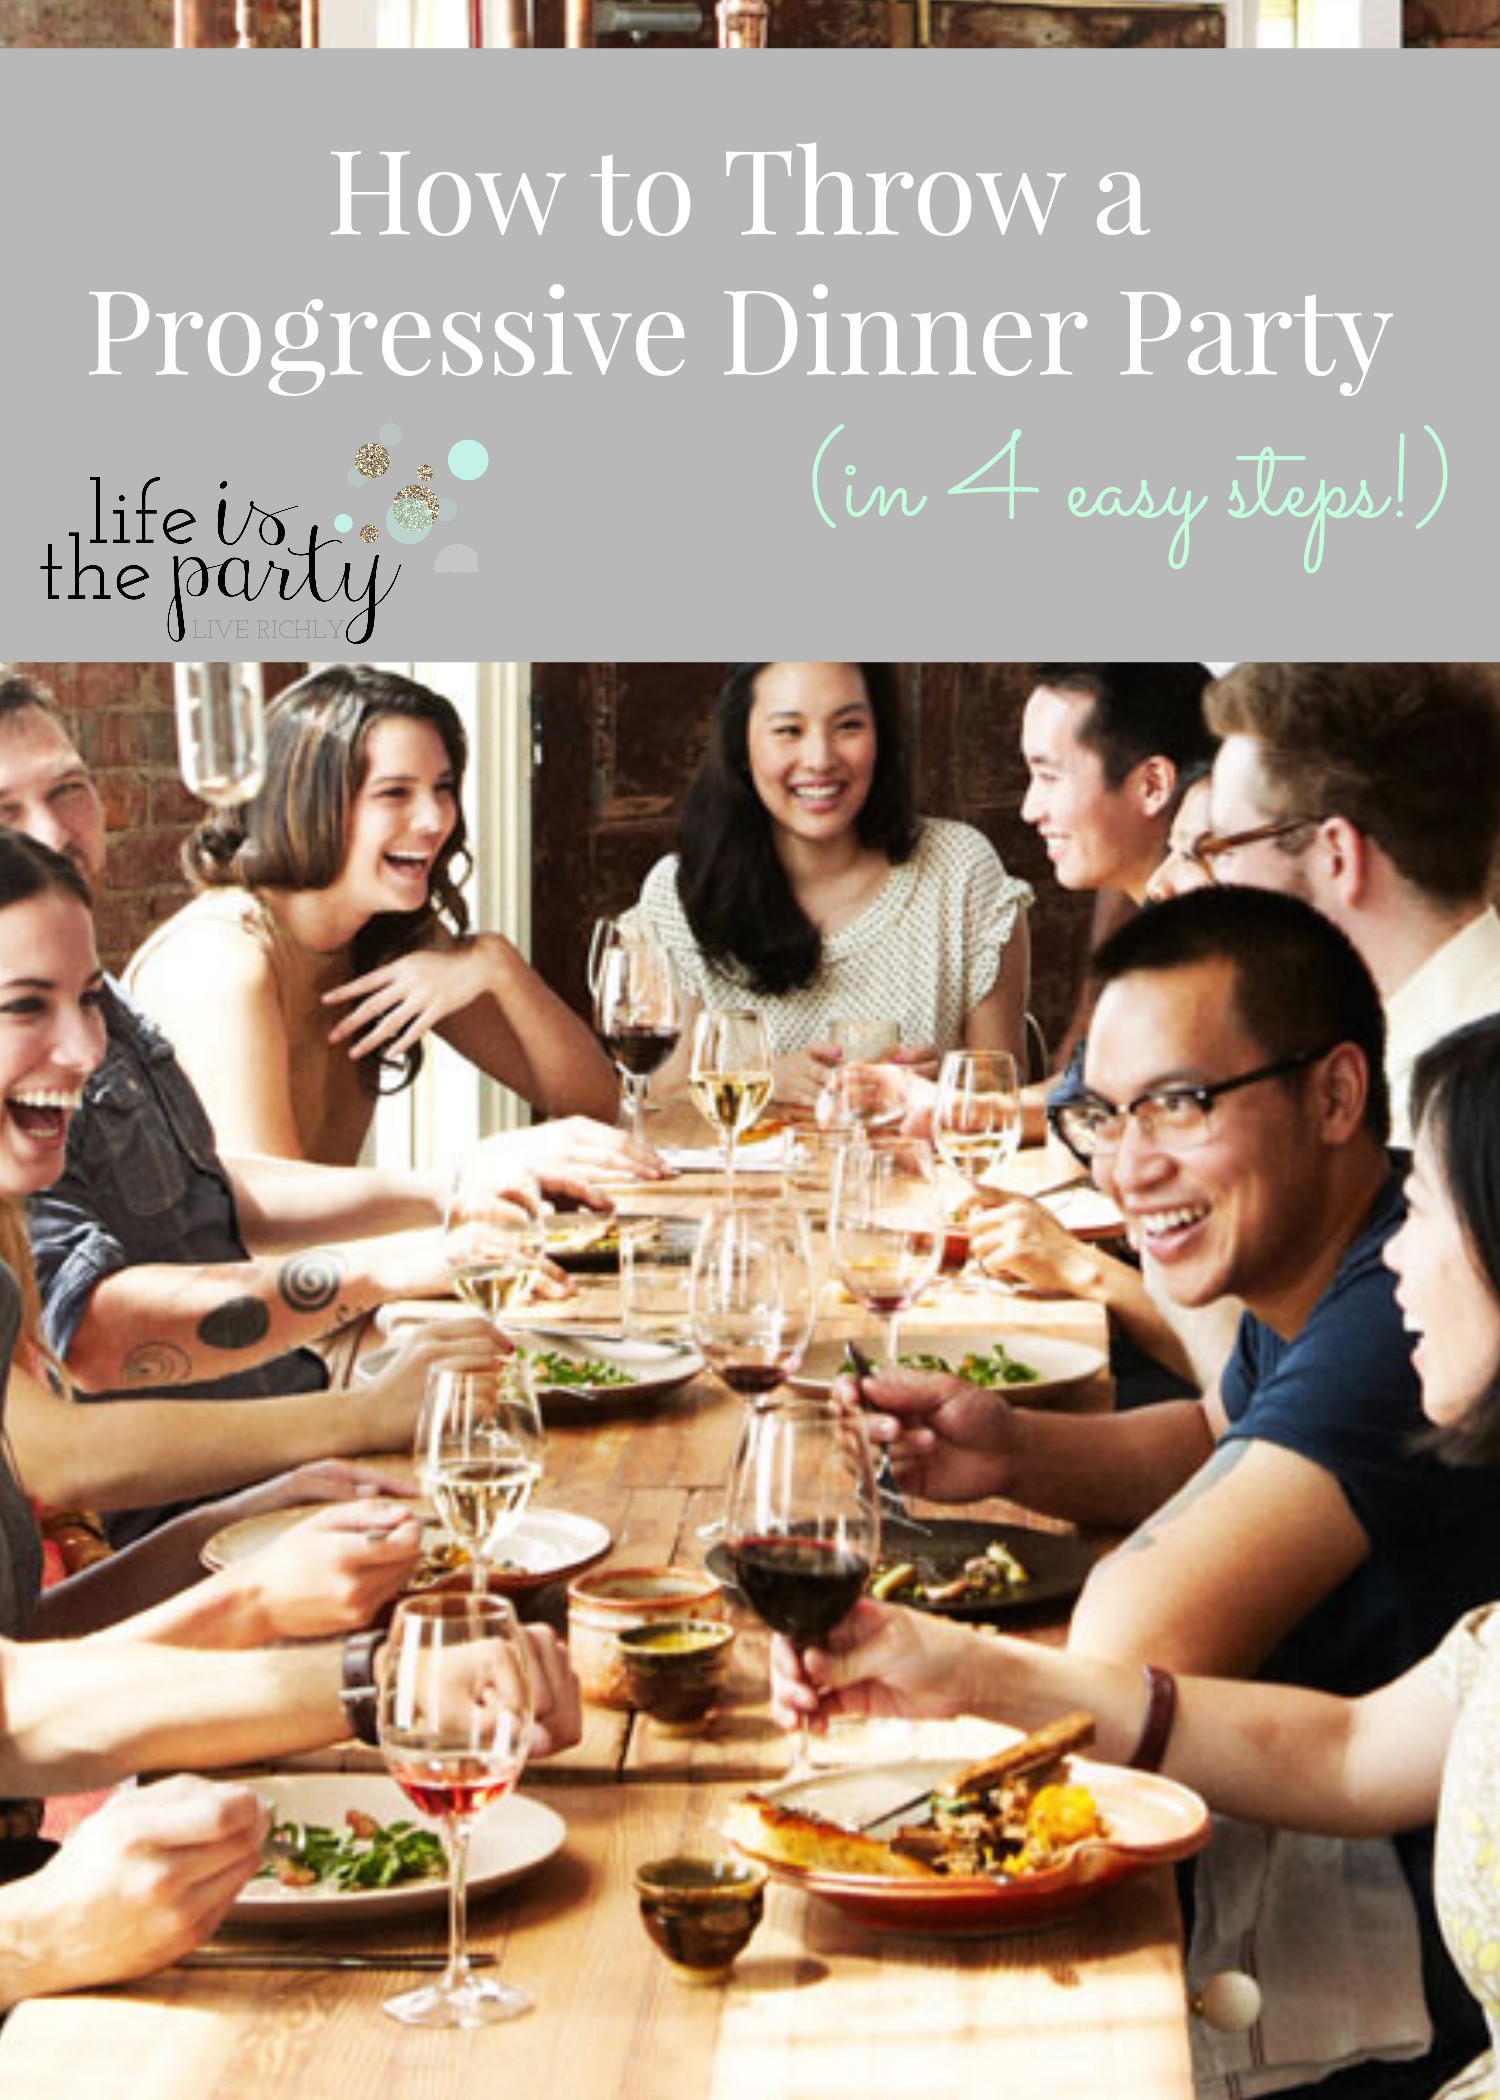 Progressive Dinner Party Ideas
 How to Throw a Progressive Dinner Party